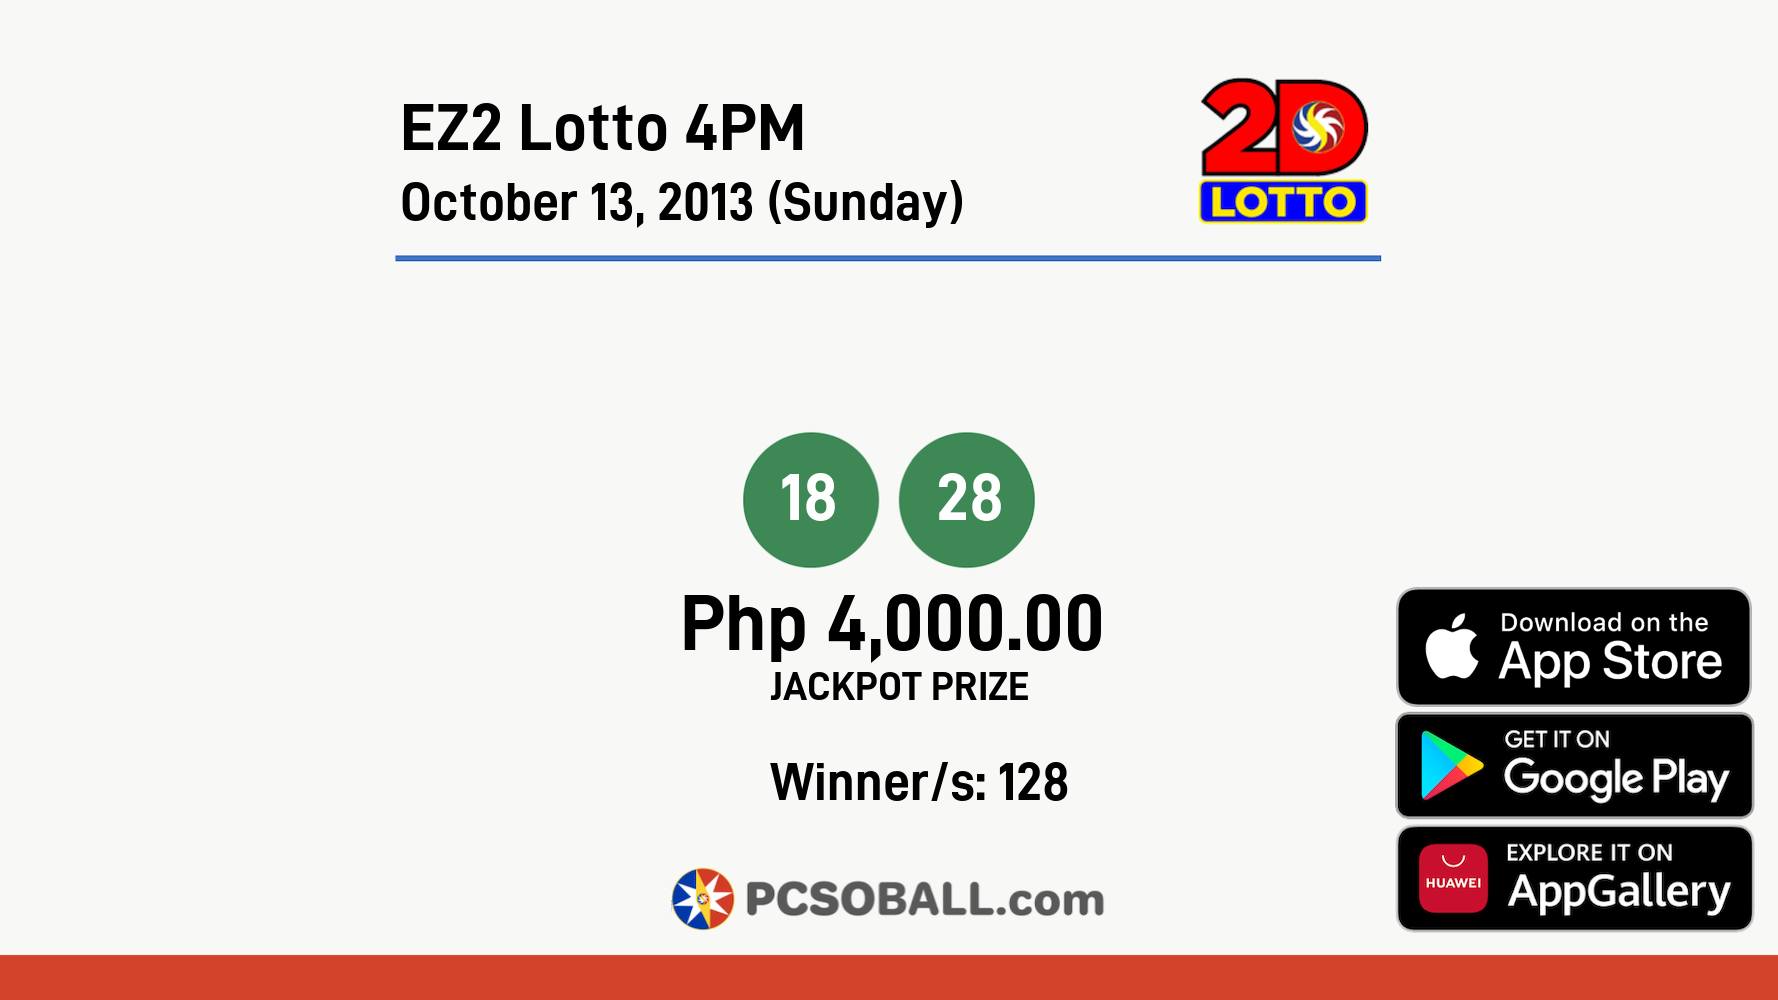 EZ2 Lotto 4PM October 13, 2013 (Sunday) Result